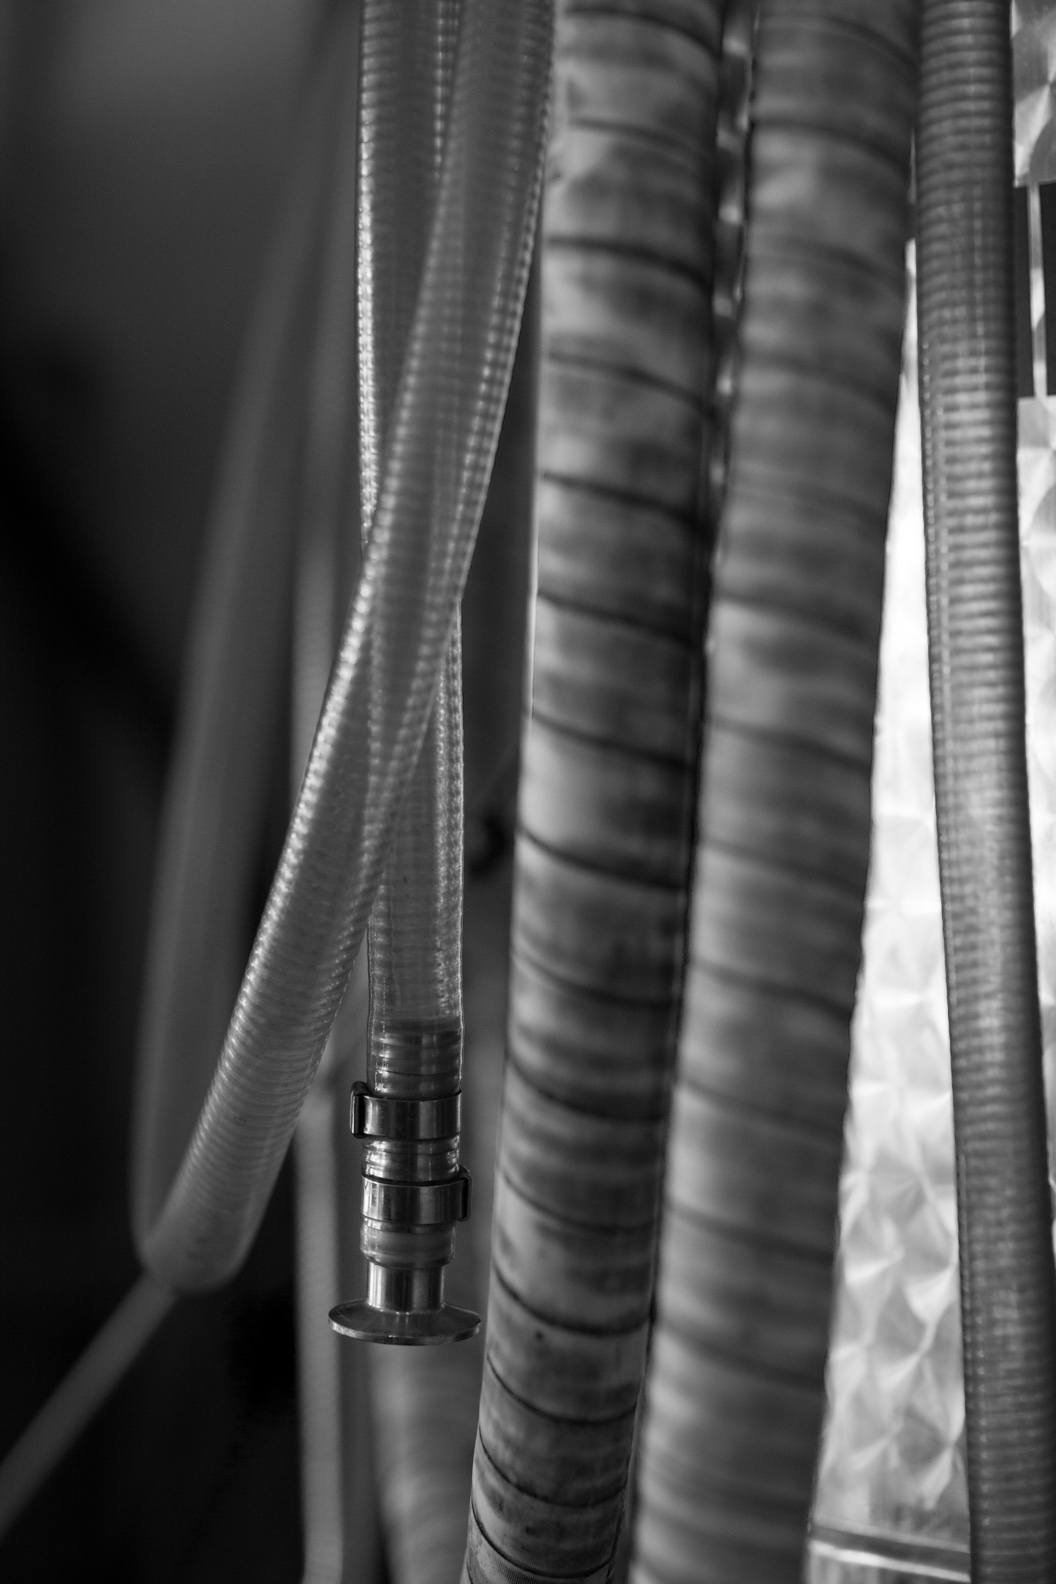 Hoses in black and white